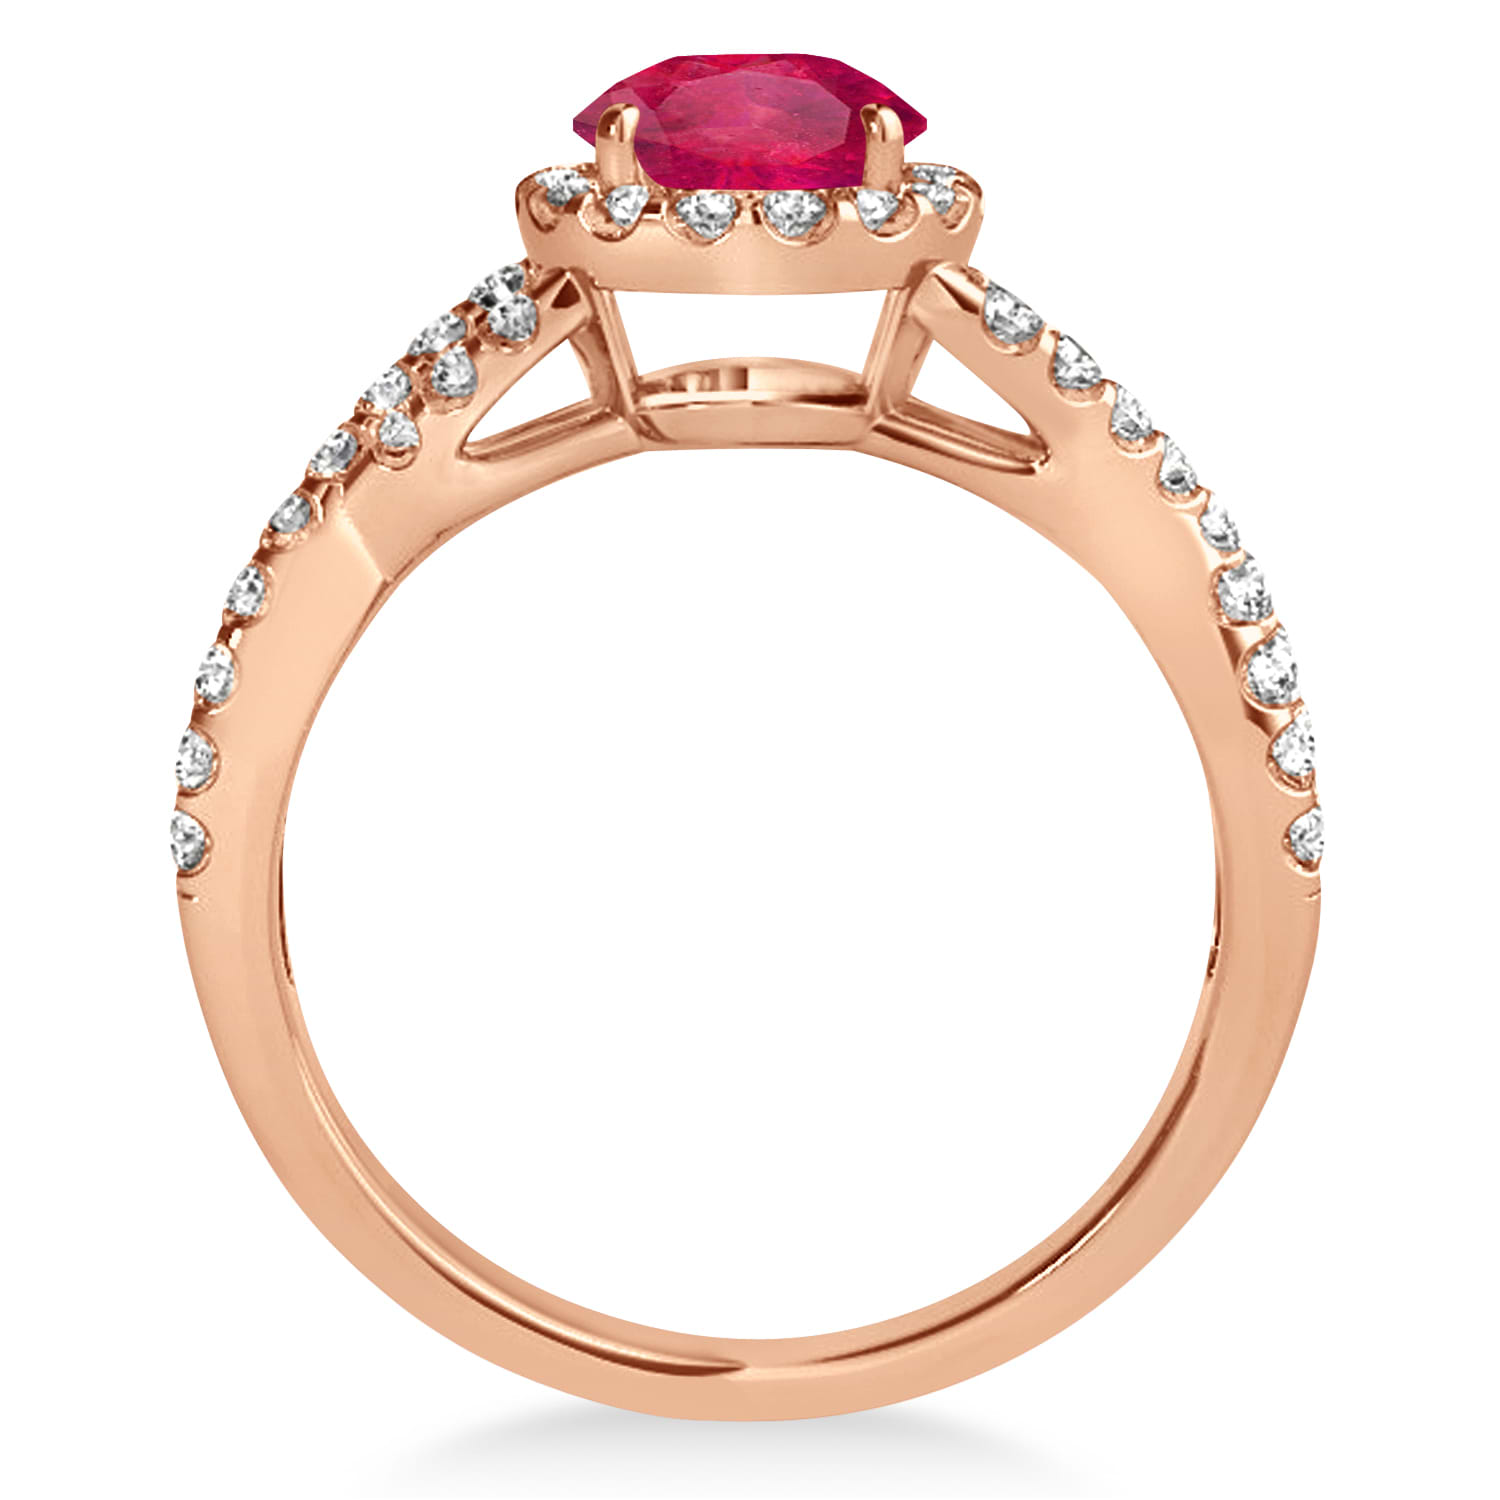 Ruby & Diamond Twisted Engagement Ring 18k Rose Gold 1.55ct